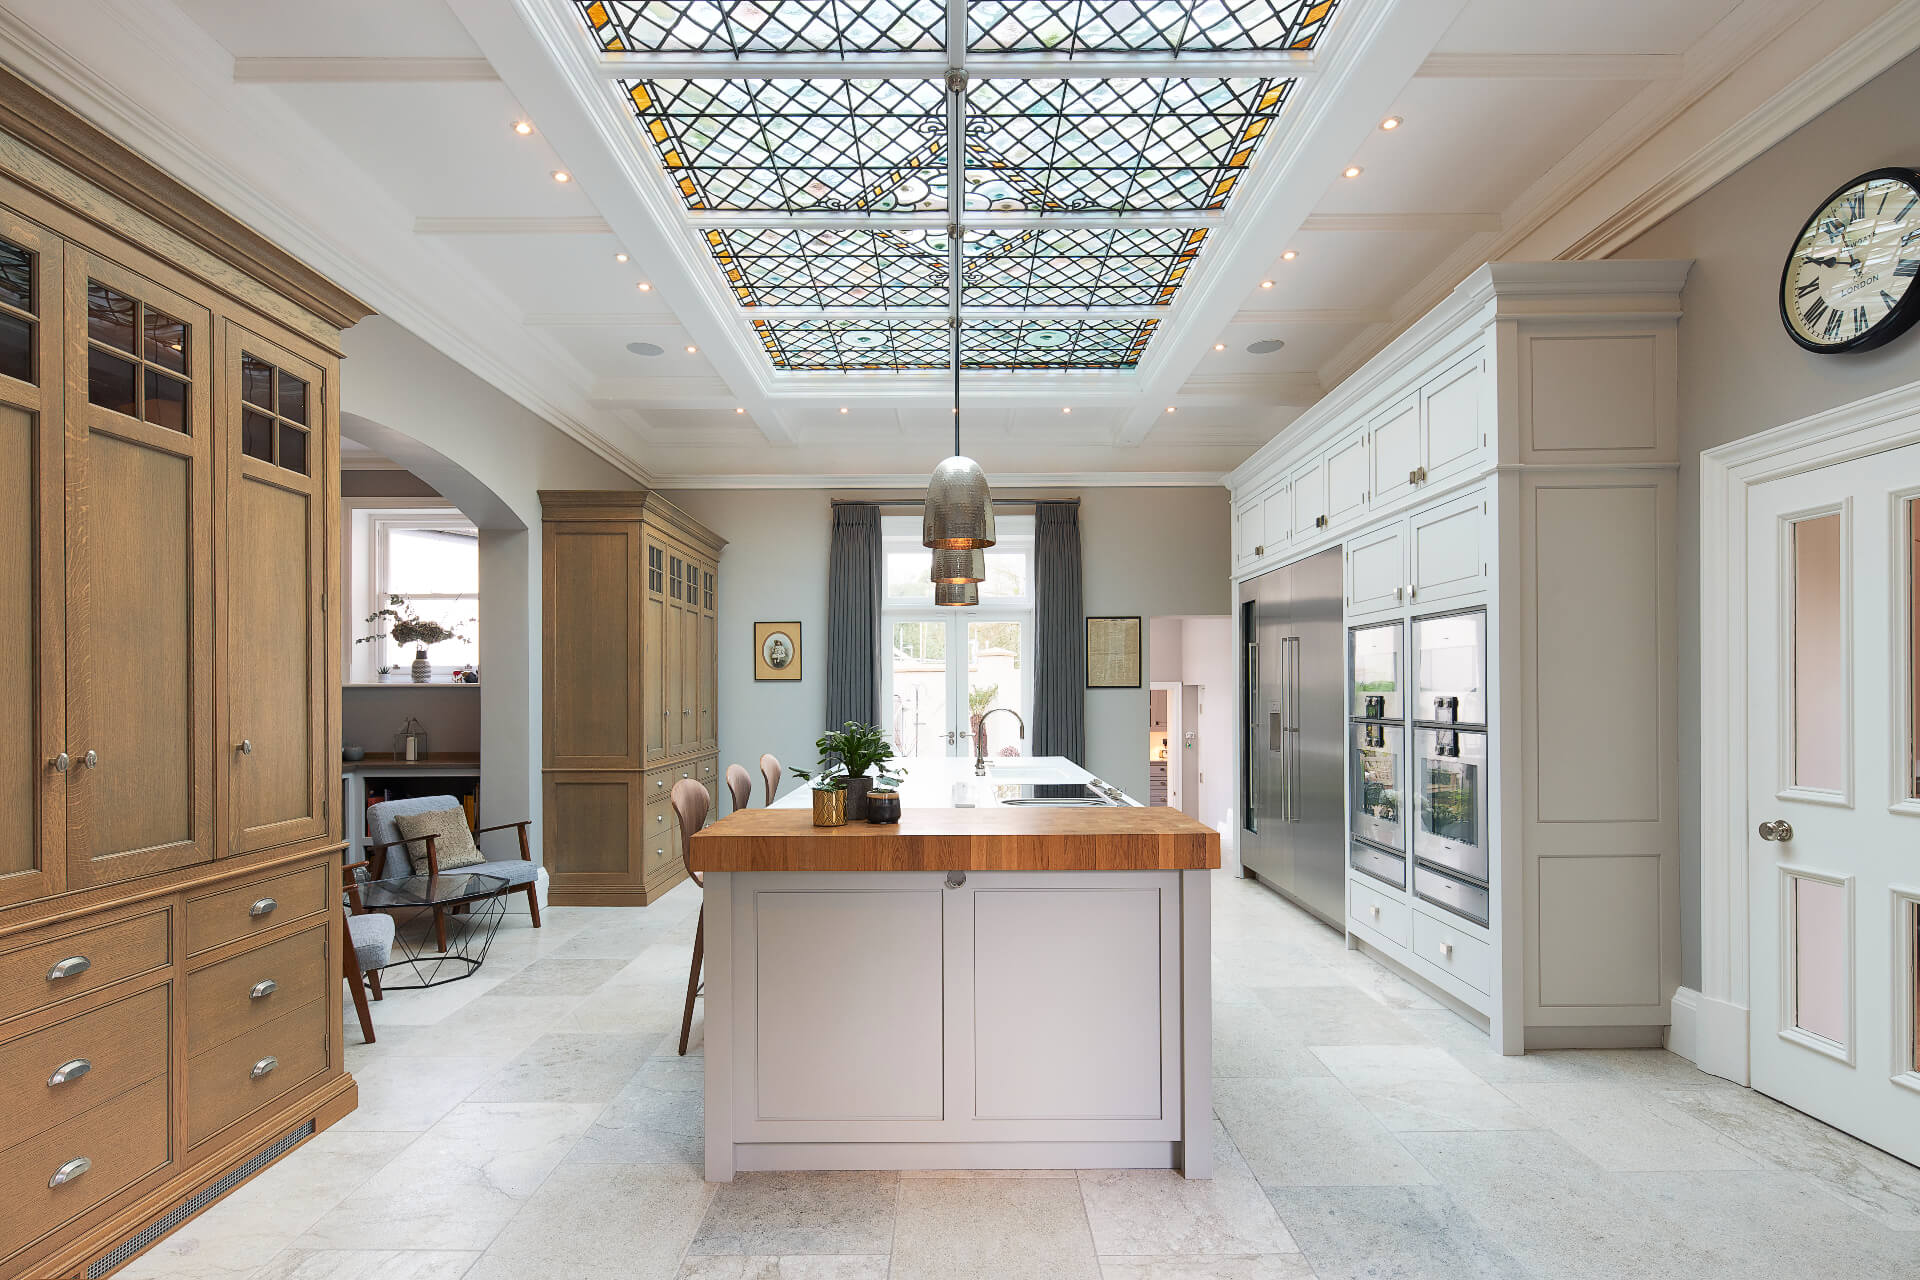 A bespoke kitchen by Hetherington Newman with a white painted island and tall dresser cabinets in oak